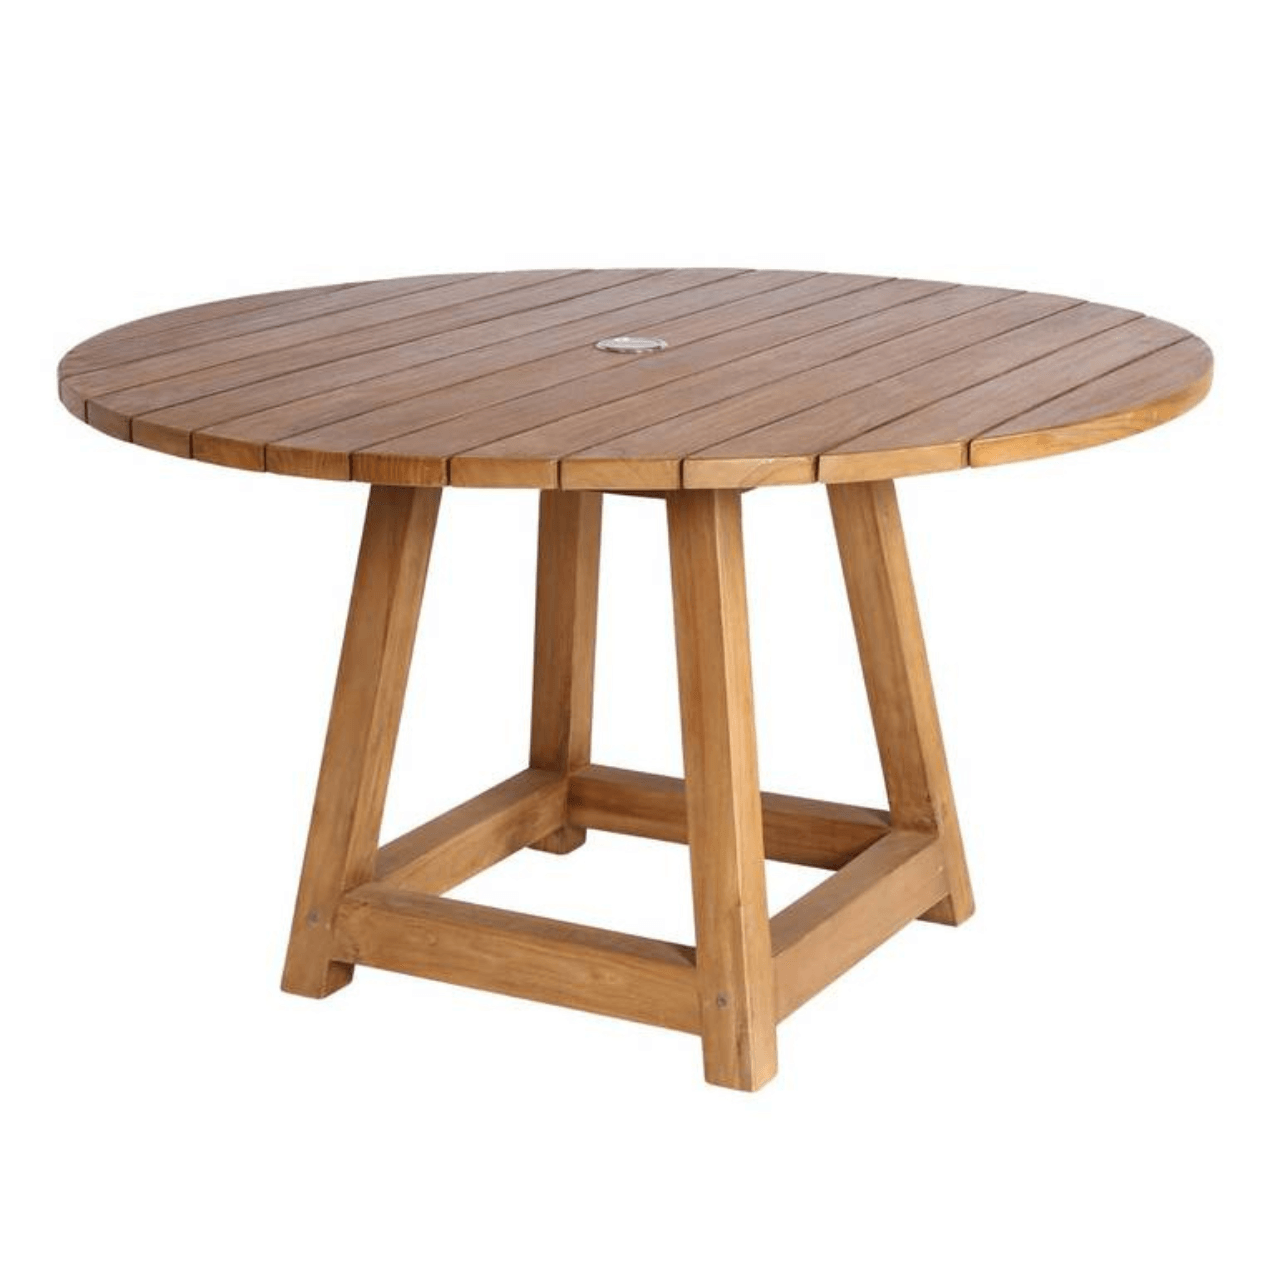 George Outdoor Teak Round Dining Table